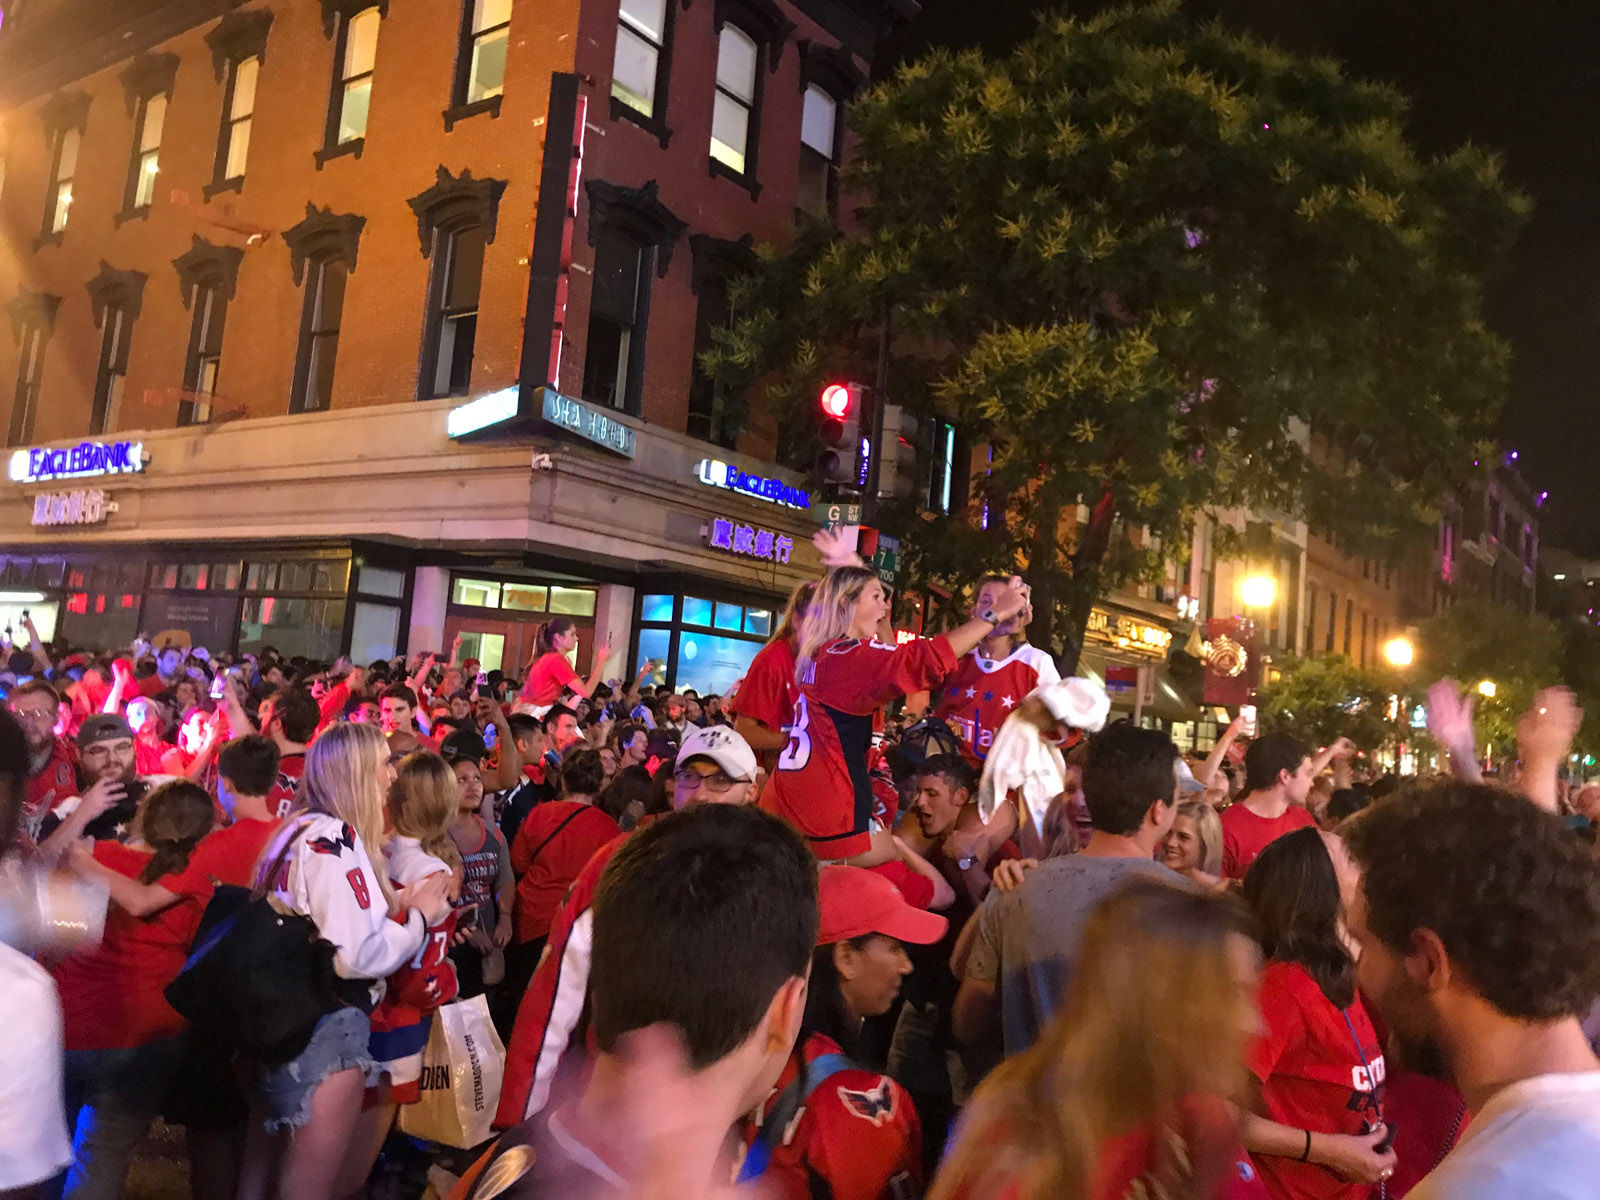 Scenes of joy outside the Capital One Arena after the Caps secured the win in Game 3 and took a 2-1 series lead against the Las Vegas Golden Knights. (WTOP/Dick Uliano)